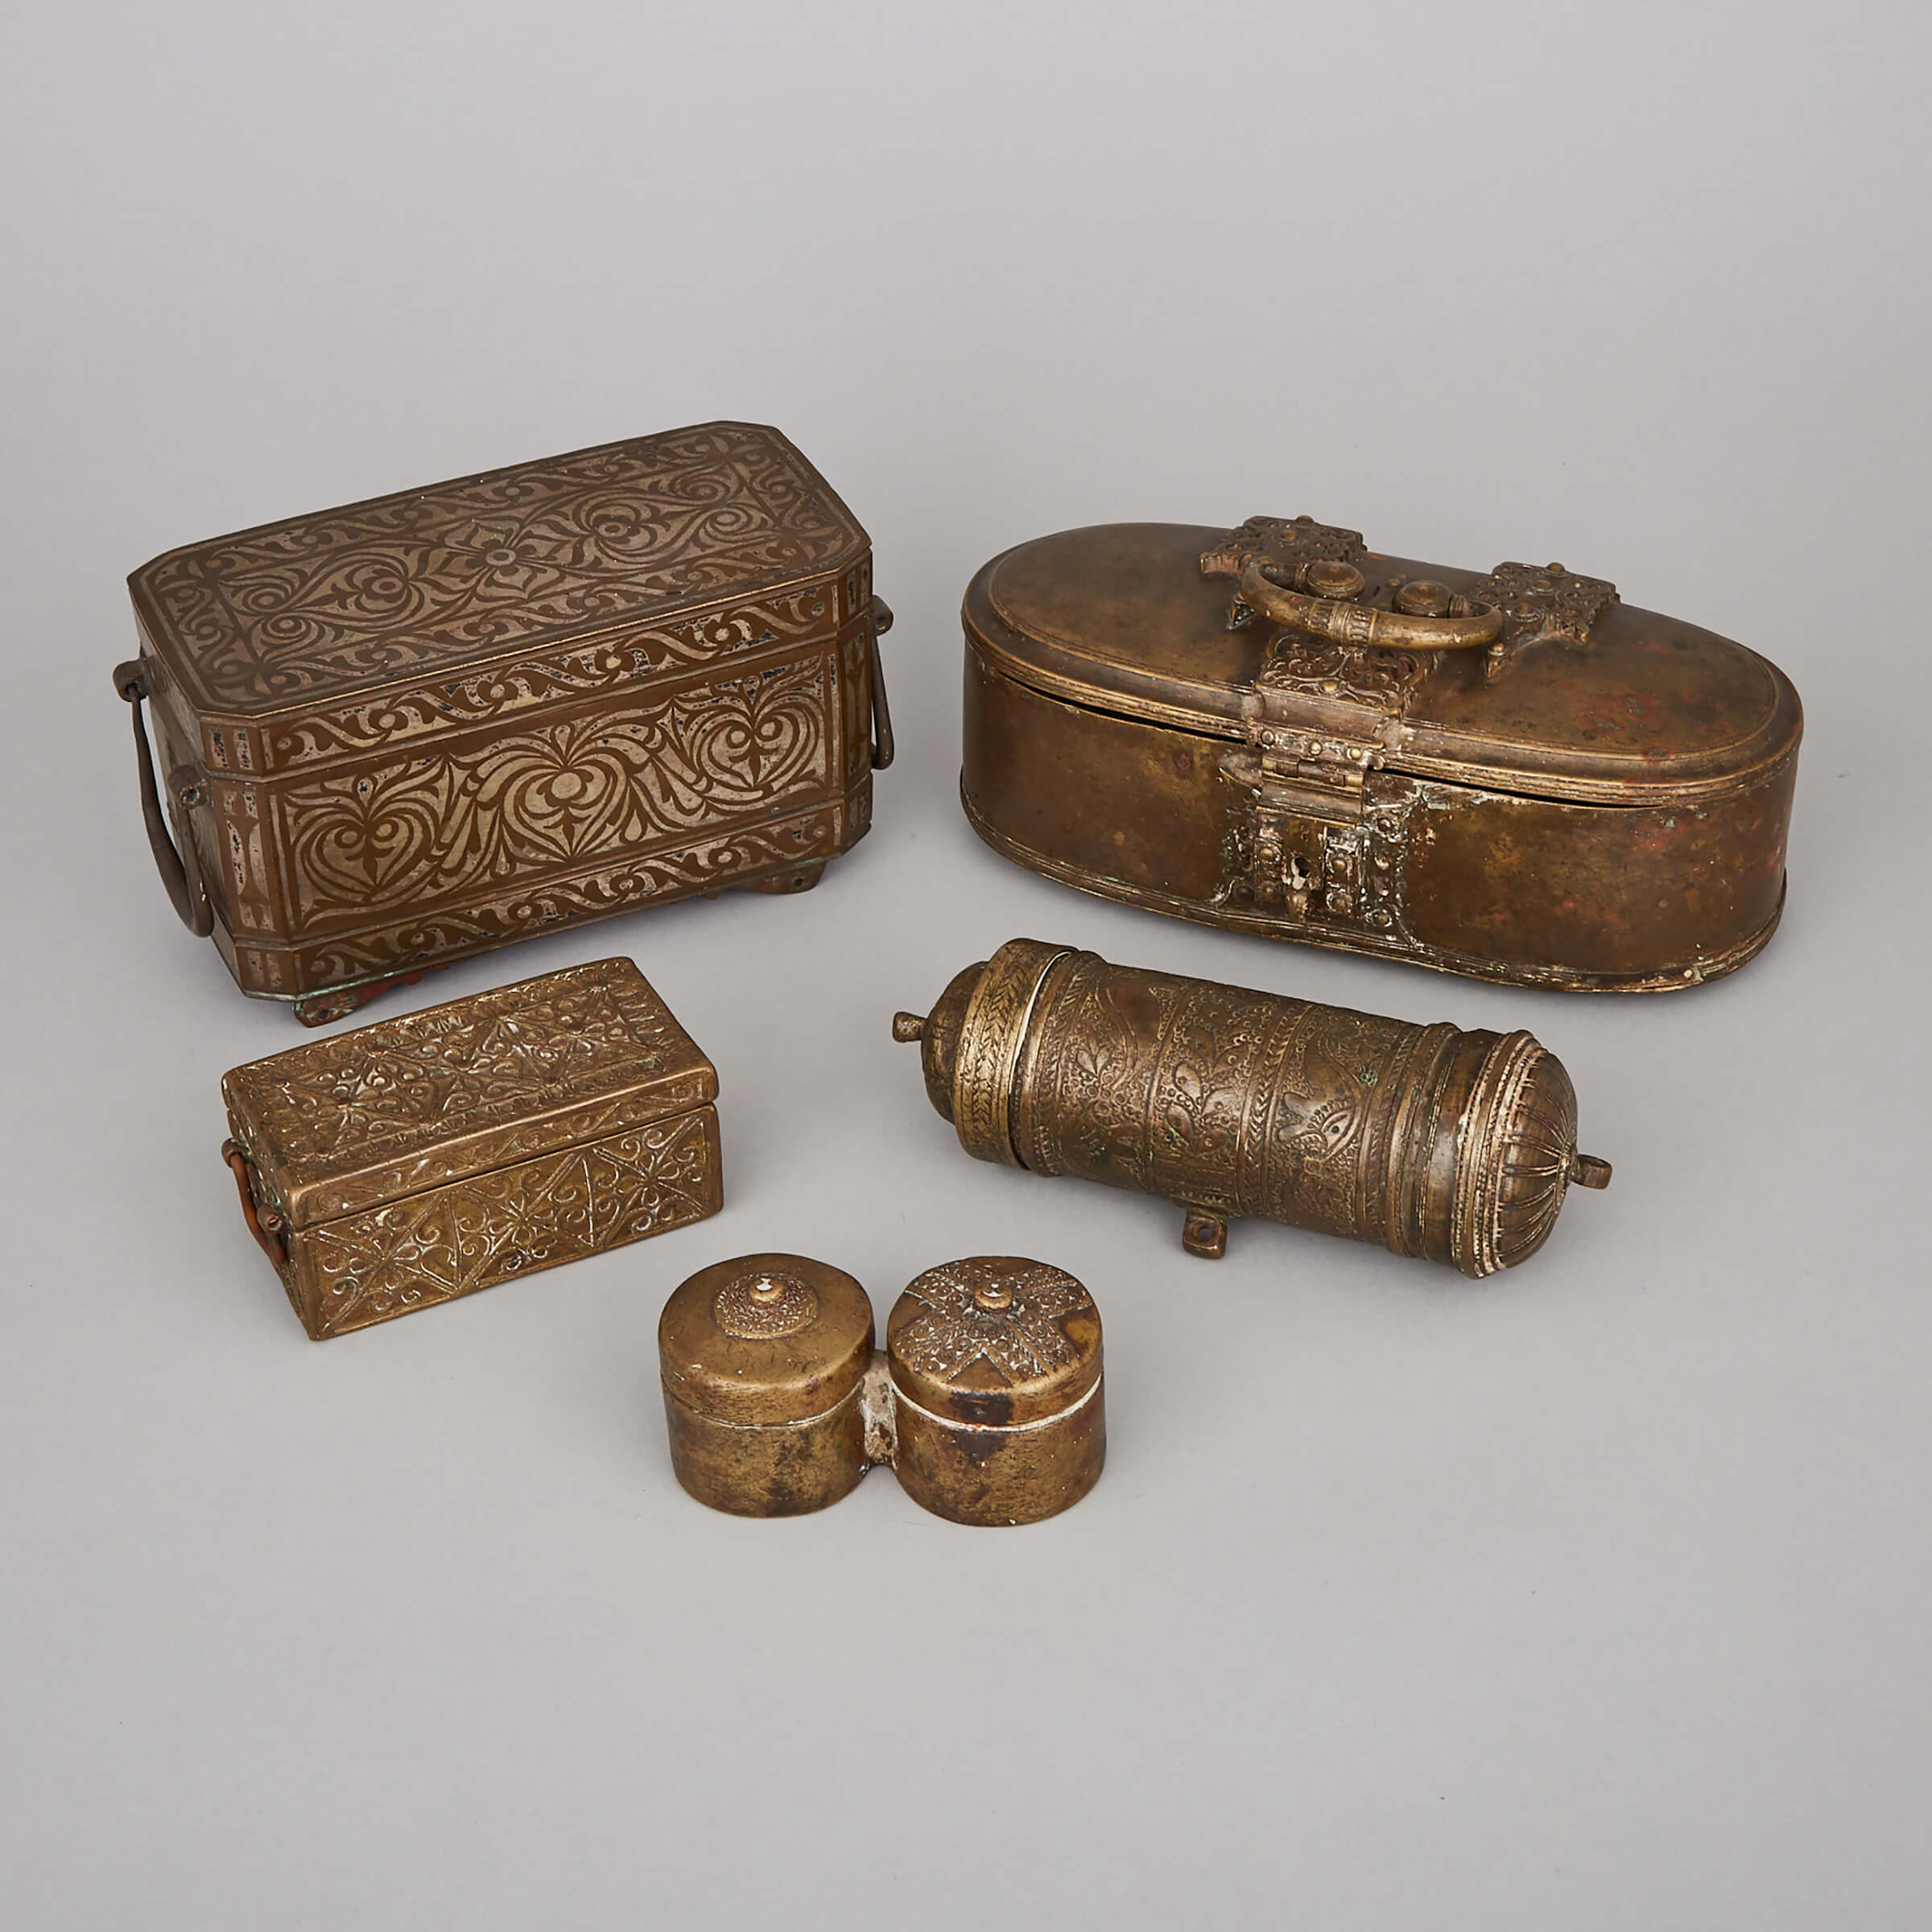 Group of Five Mindanao Brass Betal Boxes, Philippines, Early 20th Century